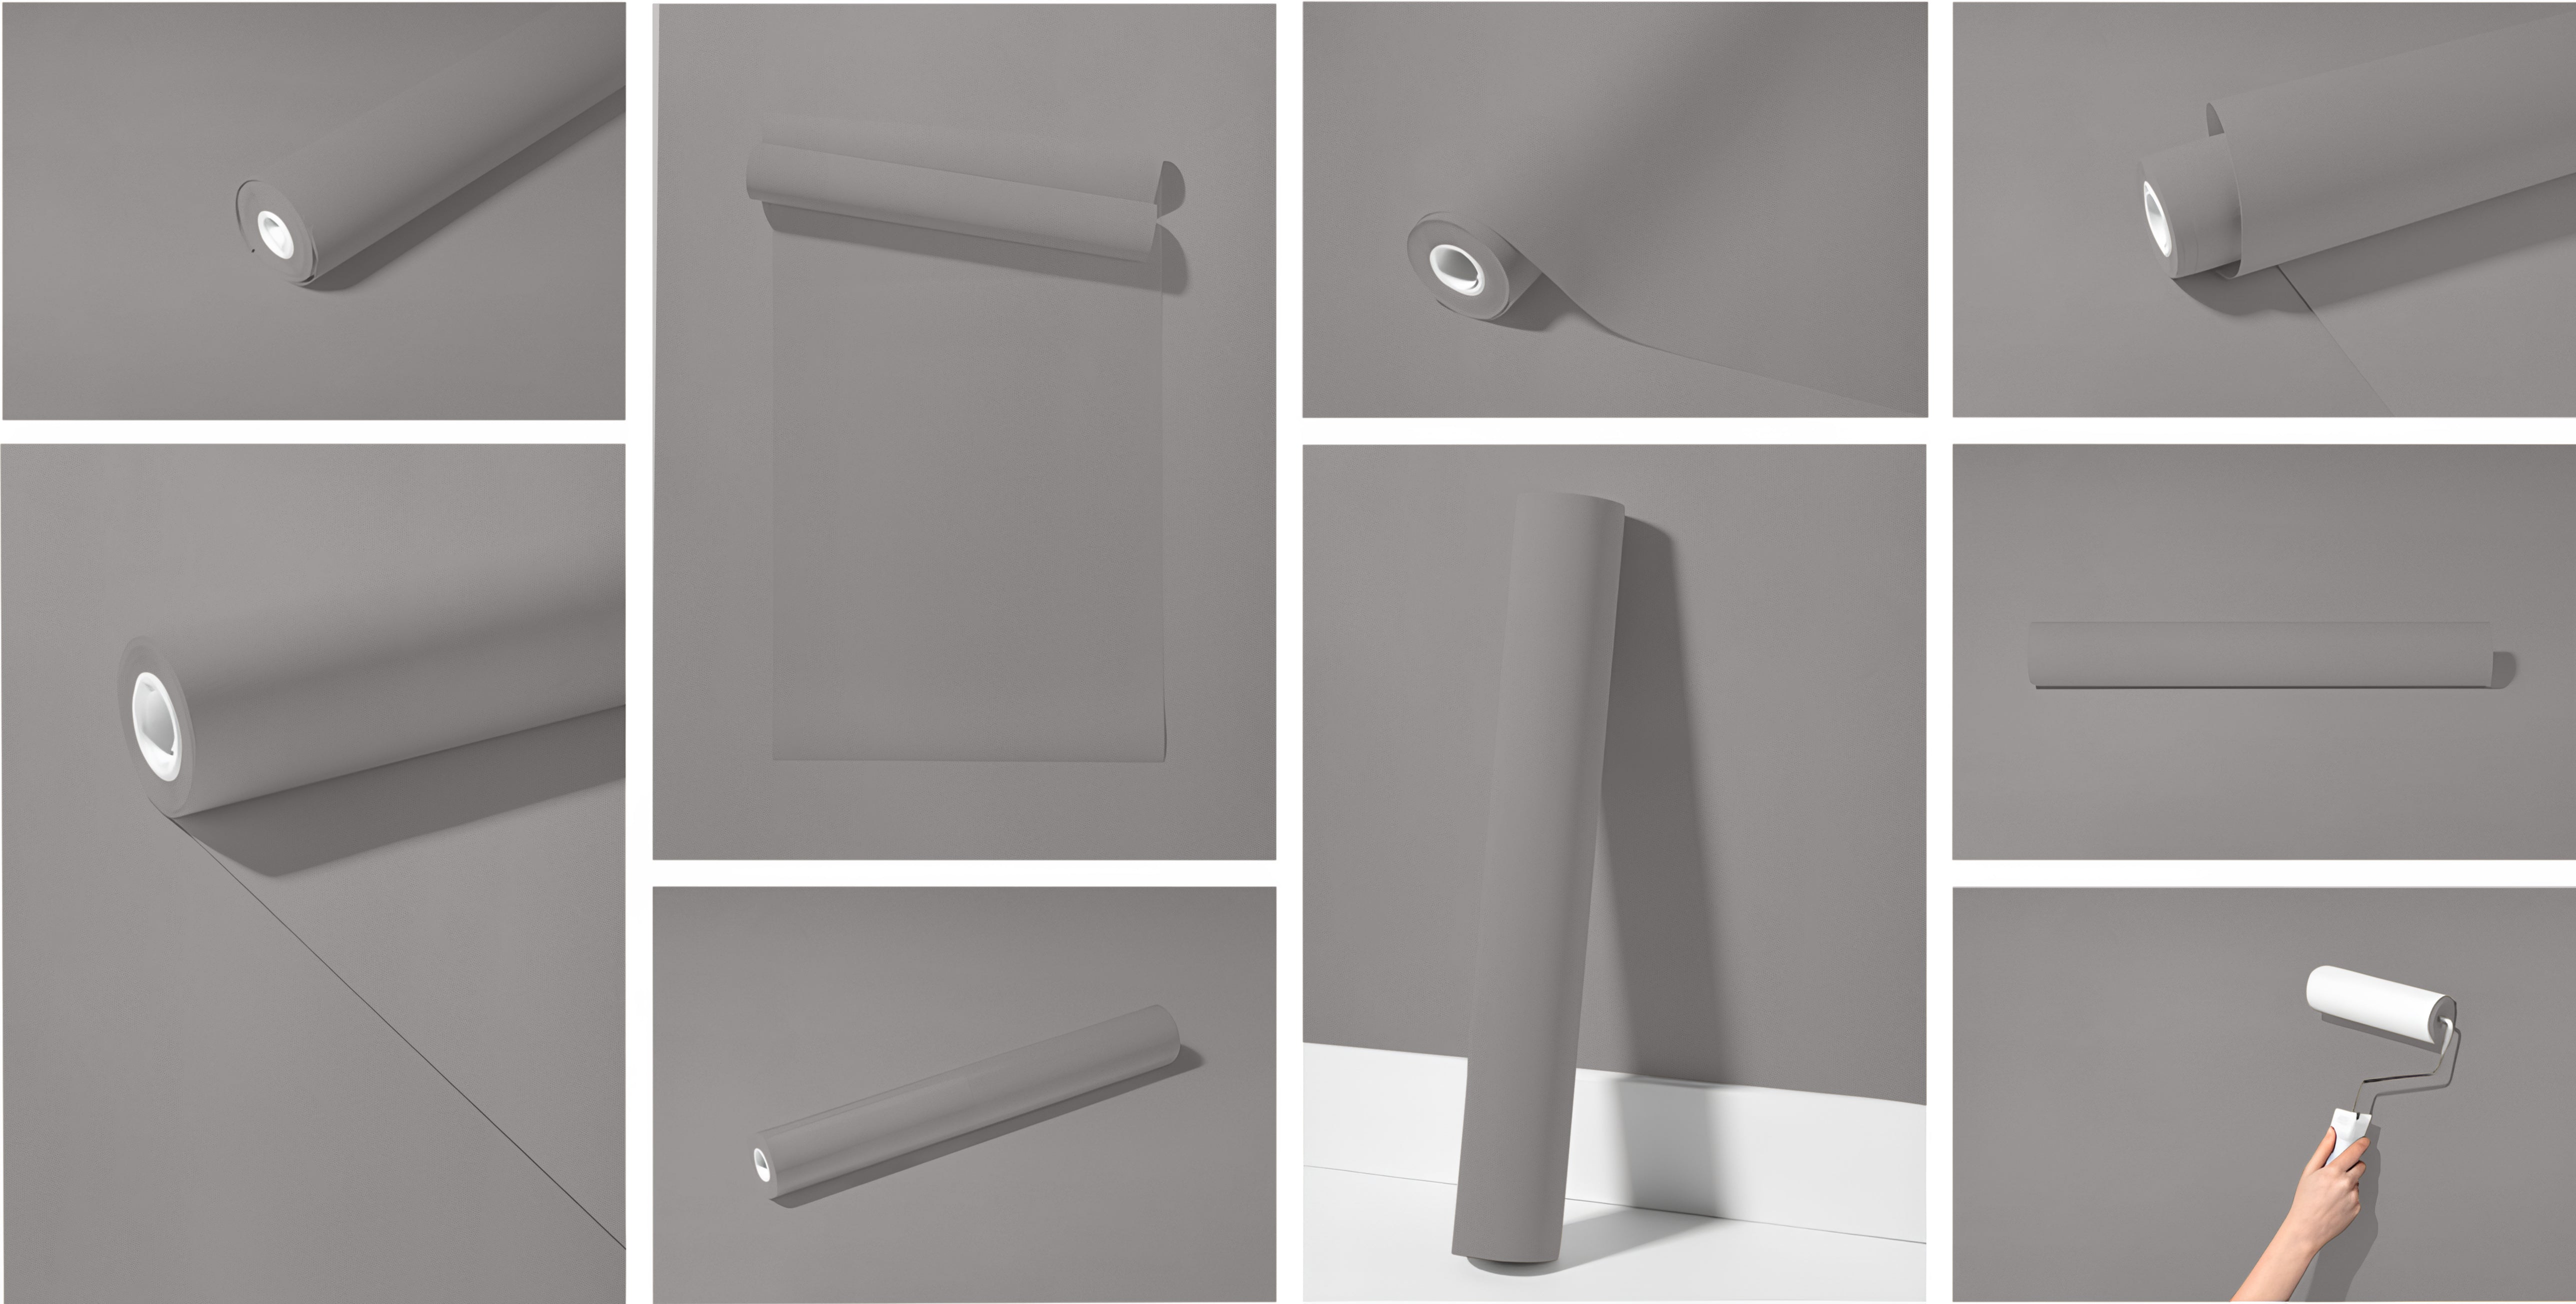 Peel & Stick Removable Re-usable Paint - Color RAL 7036 Platinum Grey - offRAL™ - RALRAW LLC, USA